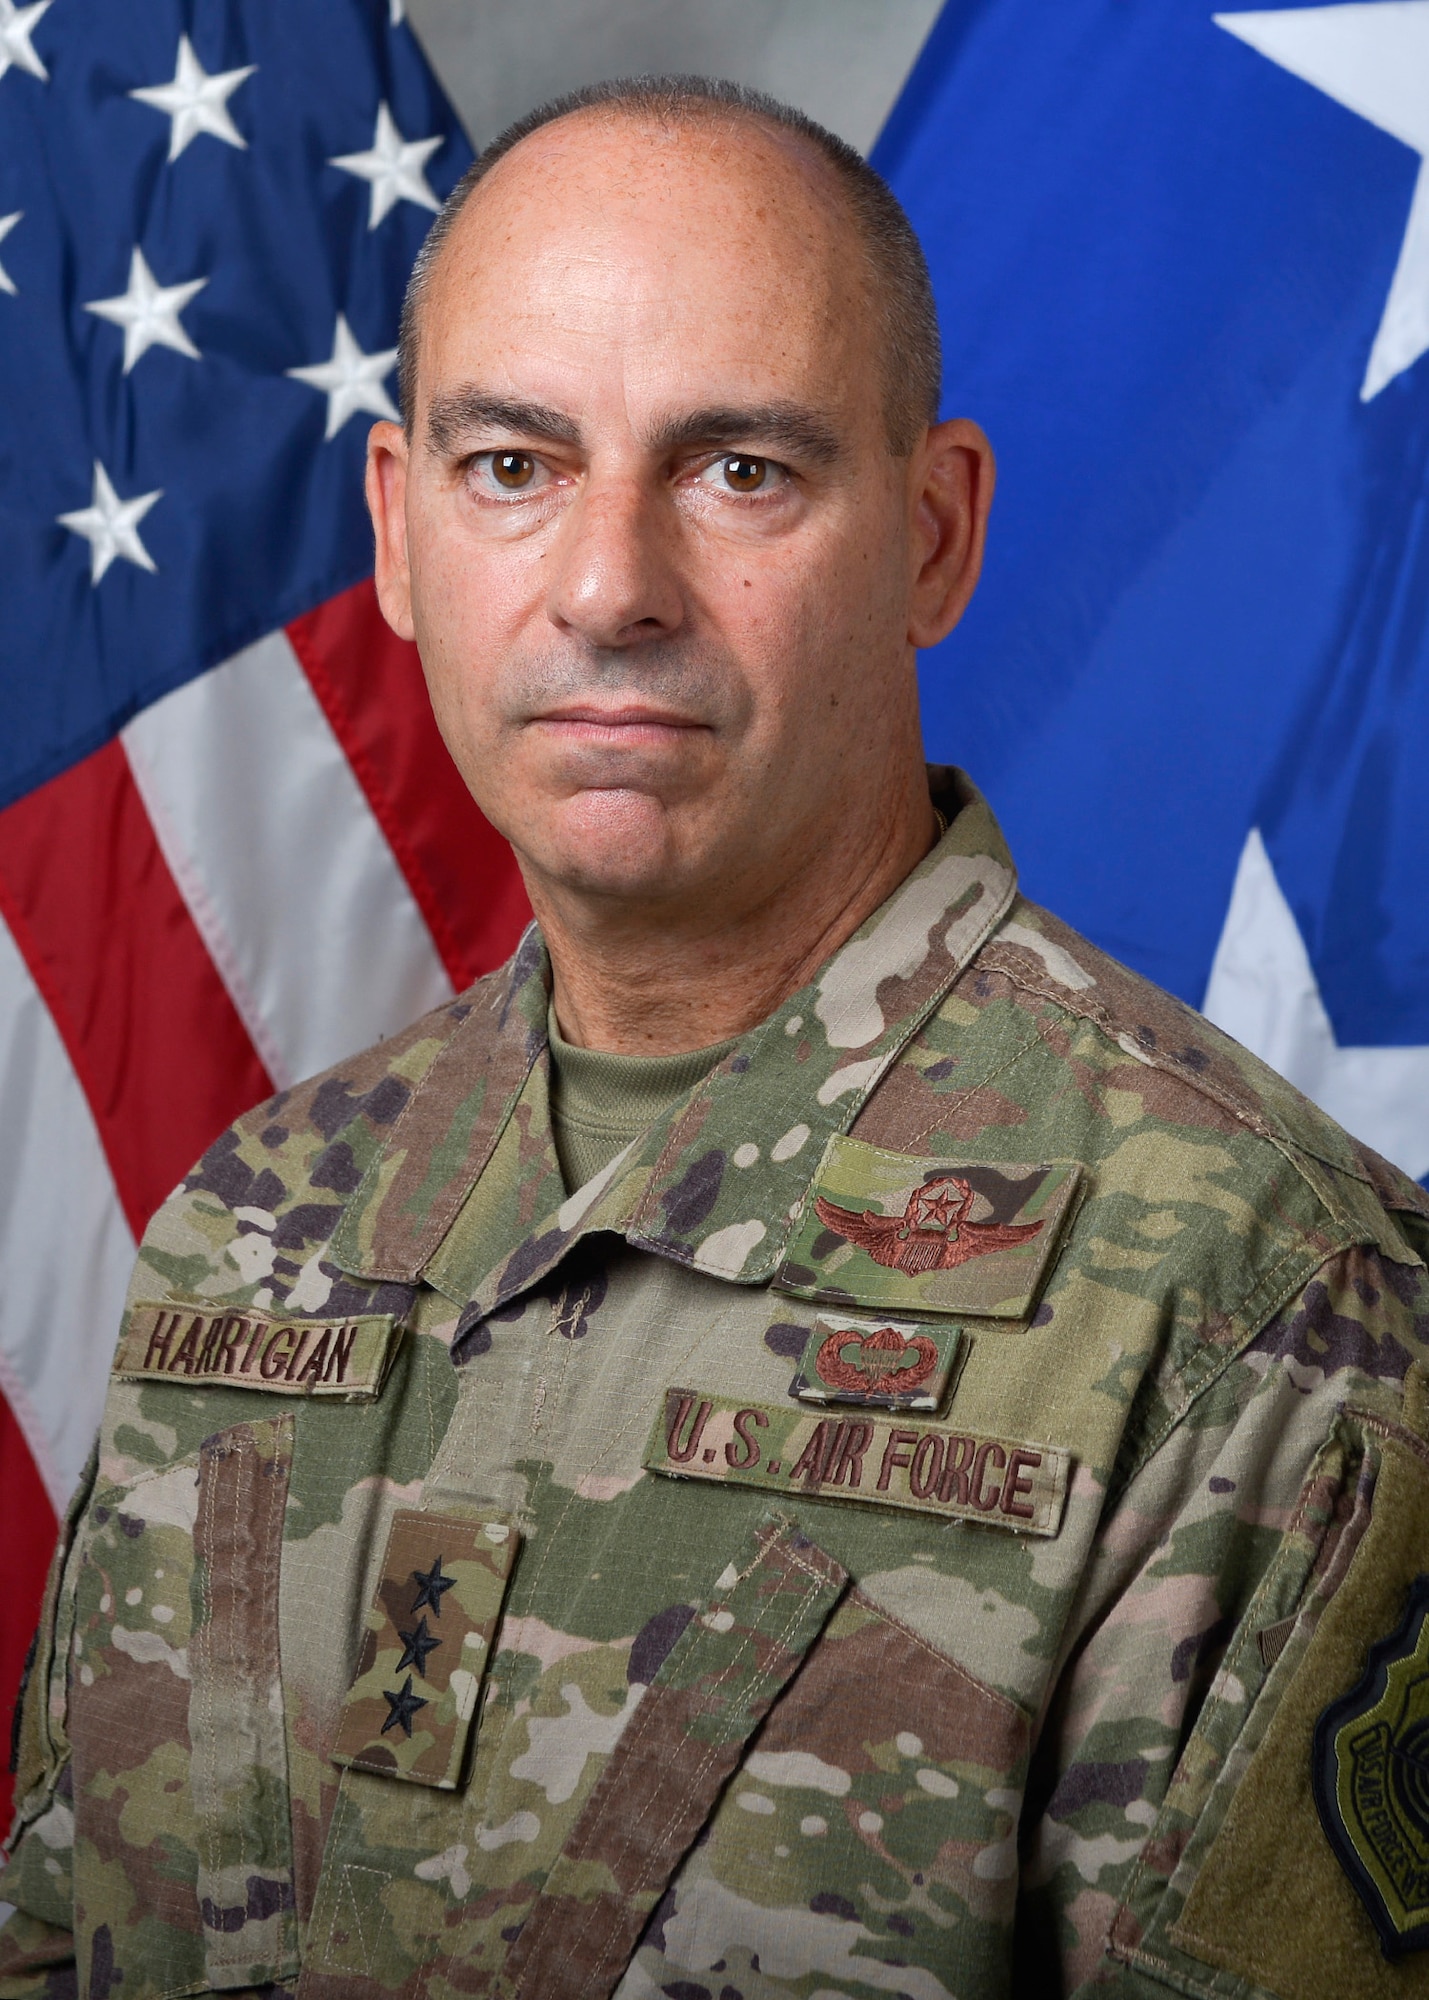 Official Photo of U.S. Air Force Lt. Gen. Jeffrey L. Harrigian, Commander, U.S. Forces Central Command, at Al Udeid Air Base, Qatar, on May 26, 2017. (U.S. Air National Guard photo by Master Sgt. Andrew J. Moseley/Released)